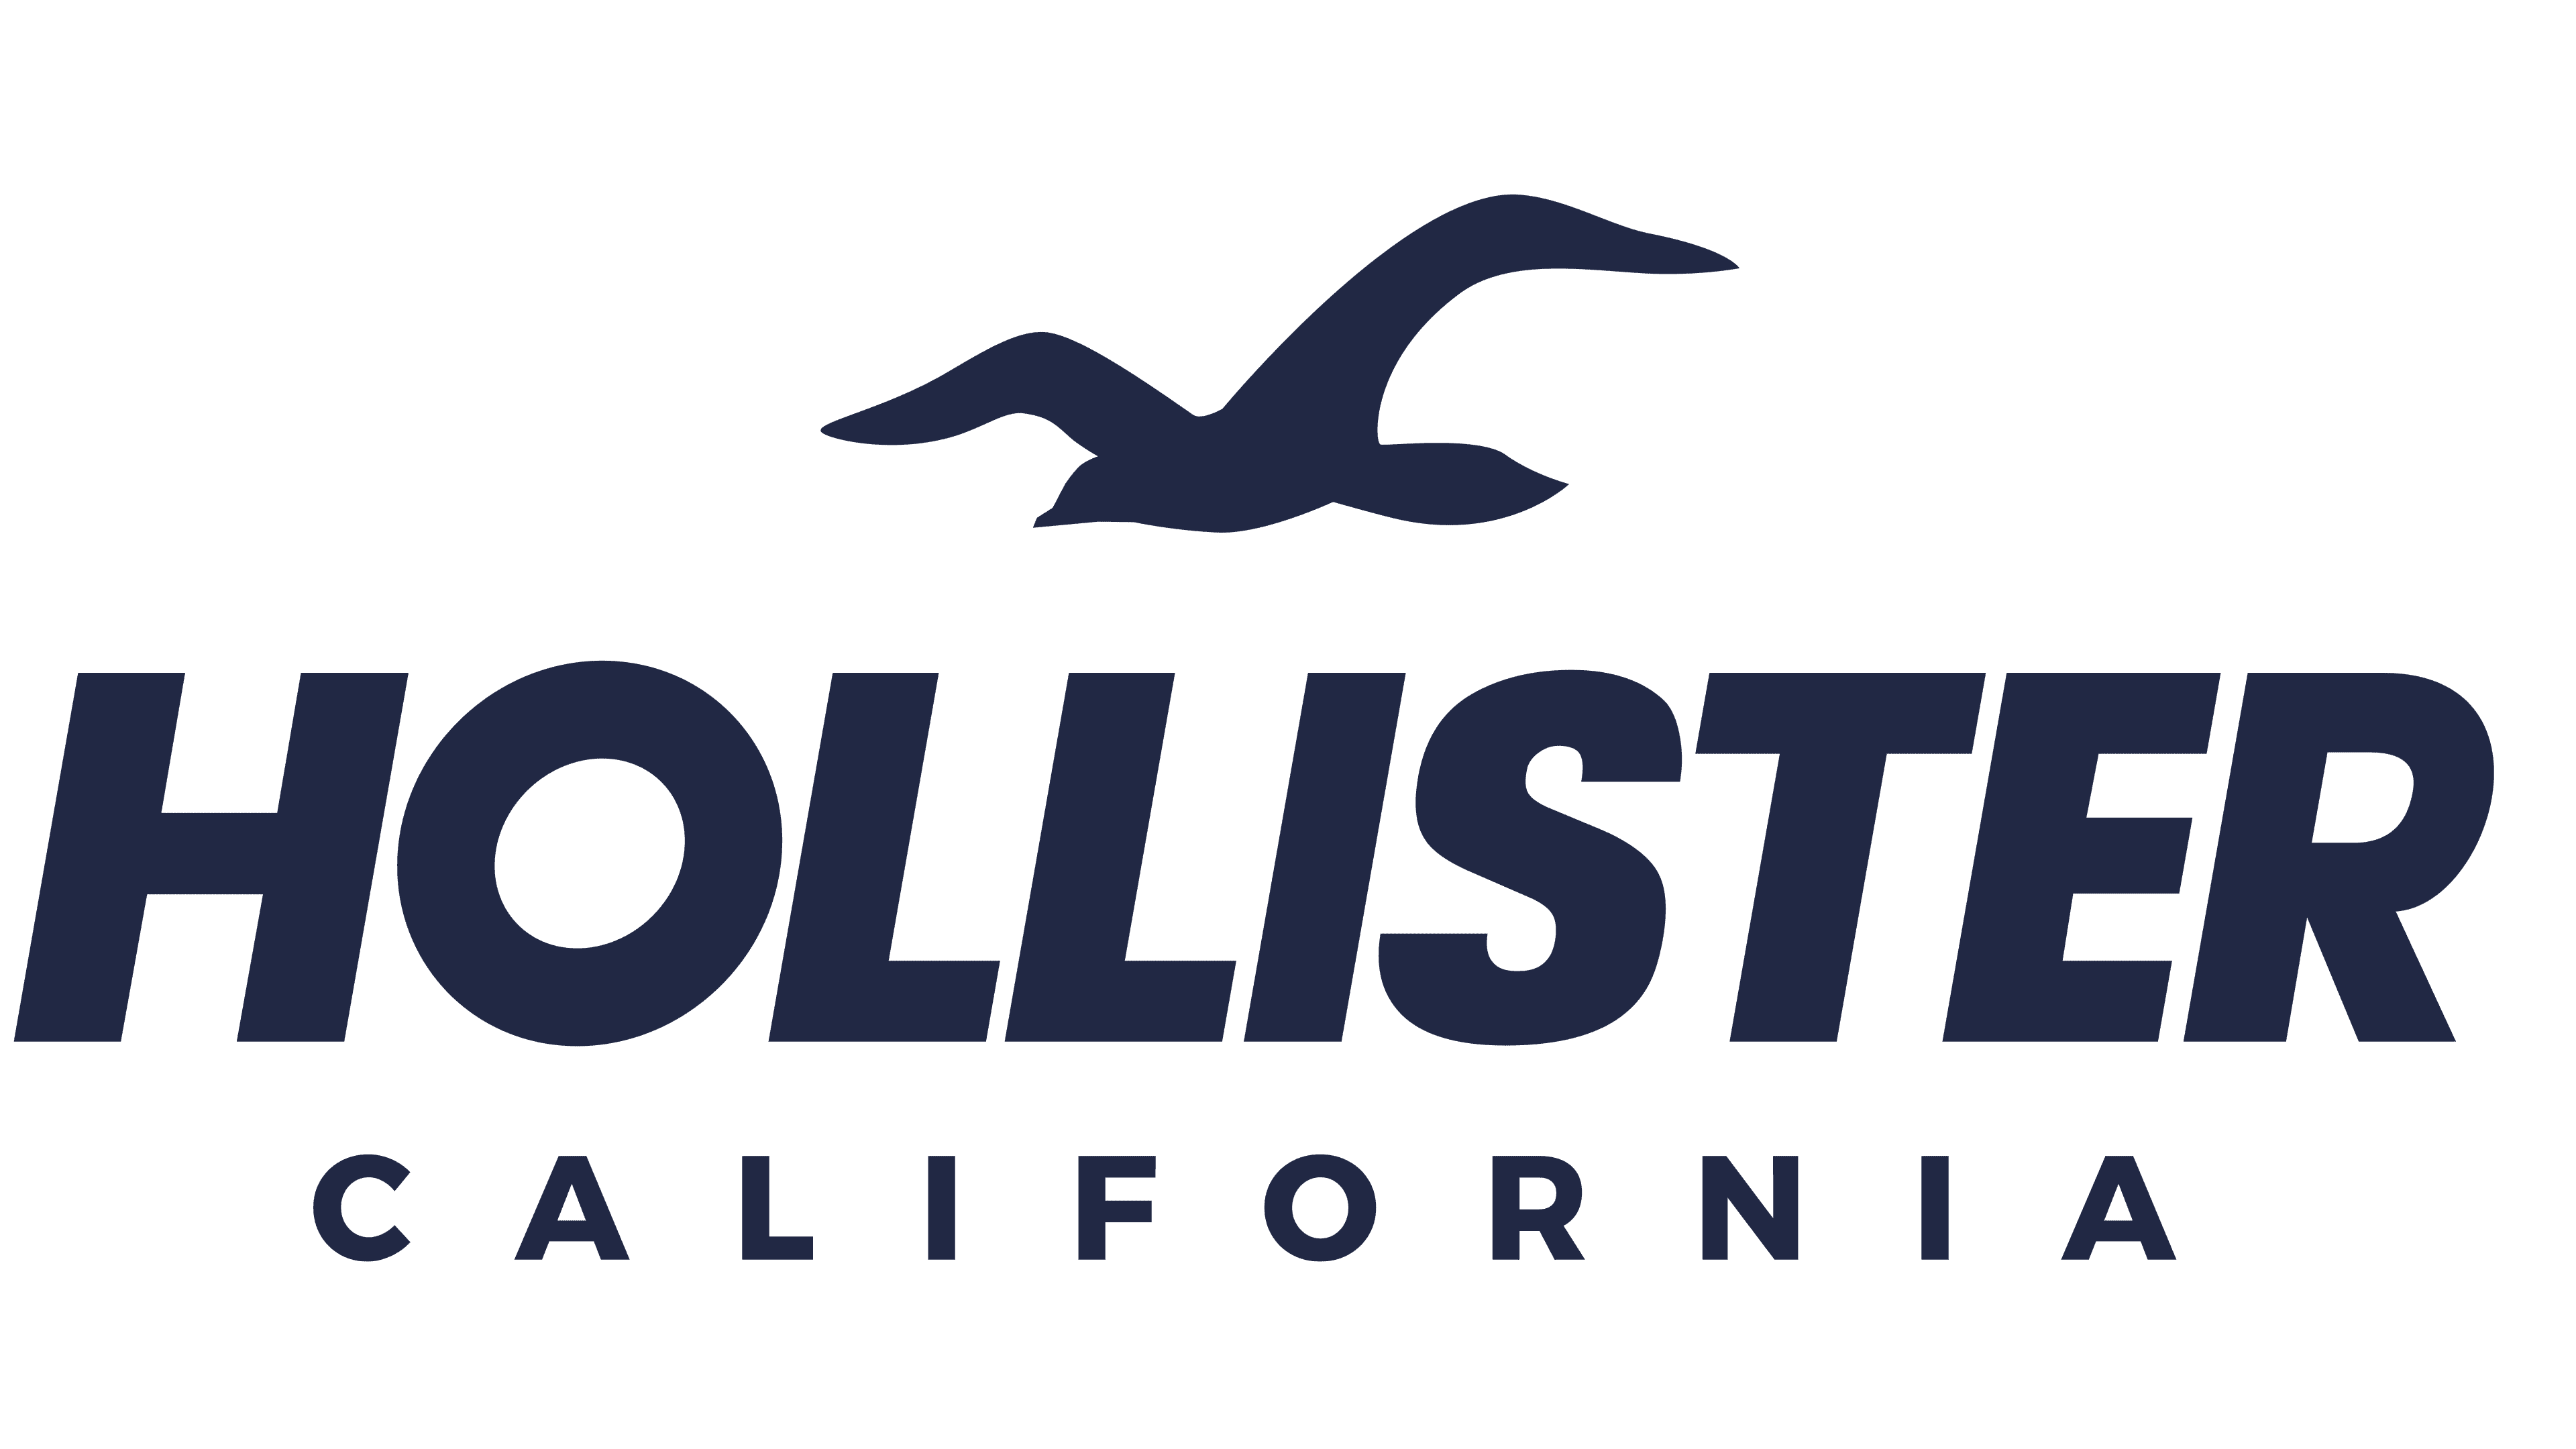 who owns hollister